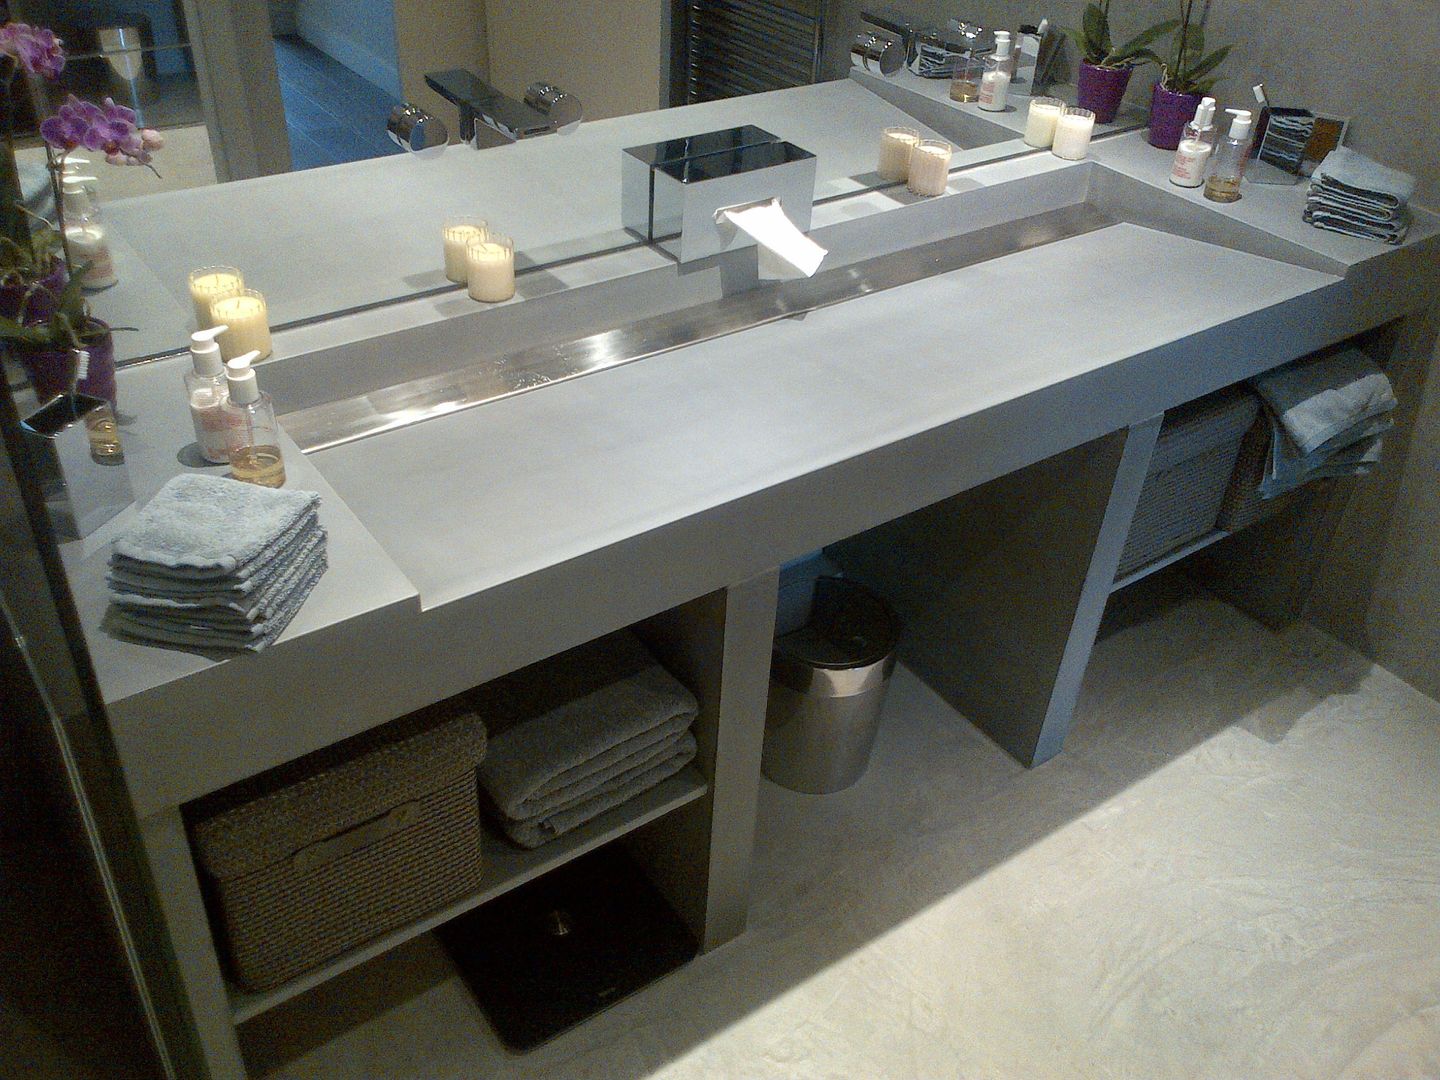 Concrete sinks & Brushed stainless steel Concrete LCDA Moderne badkamers concrete sink,concrete bathroom,bespoke sink,bespoke bathroom